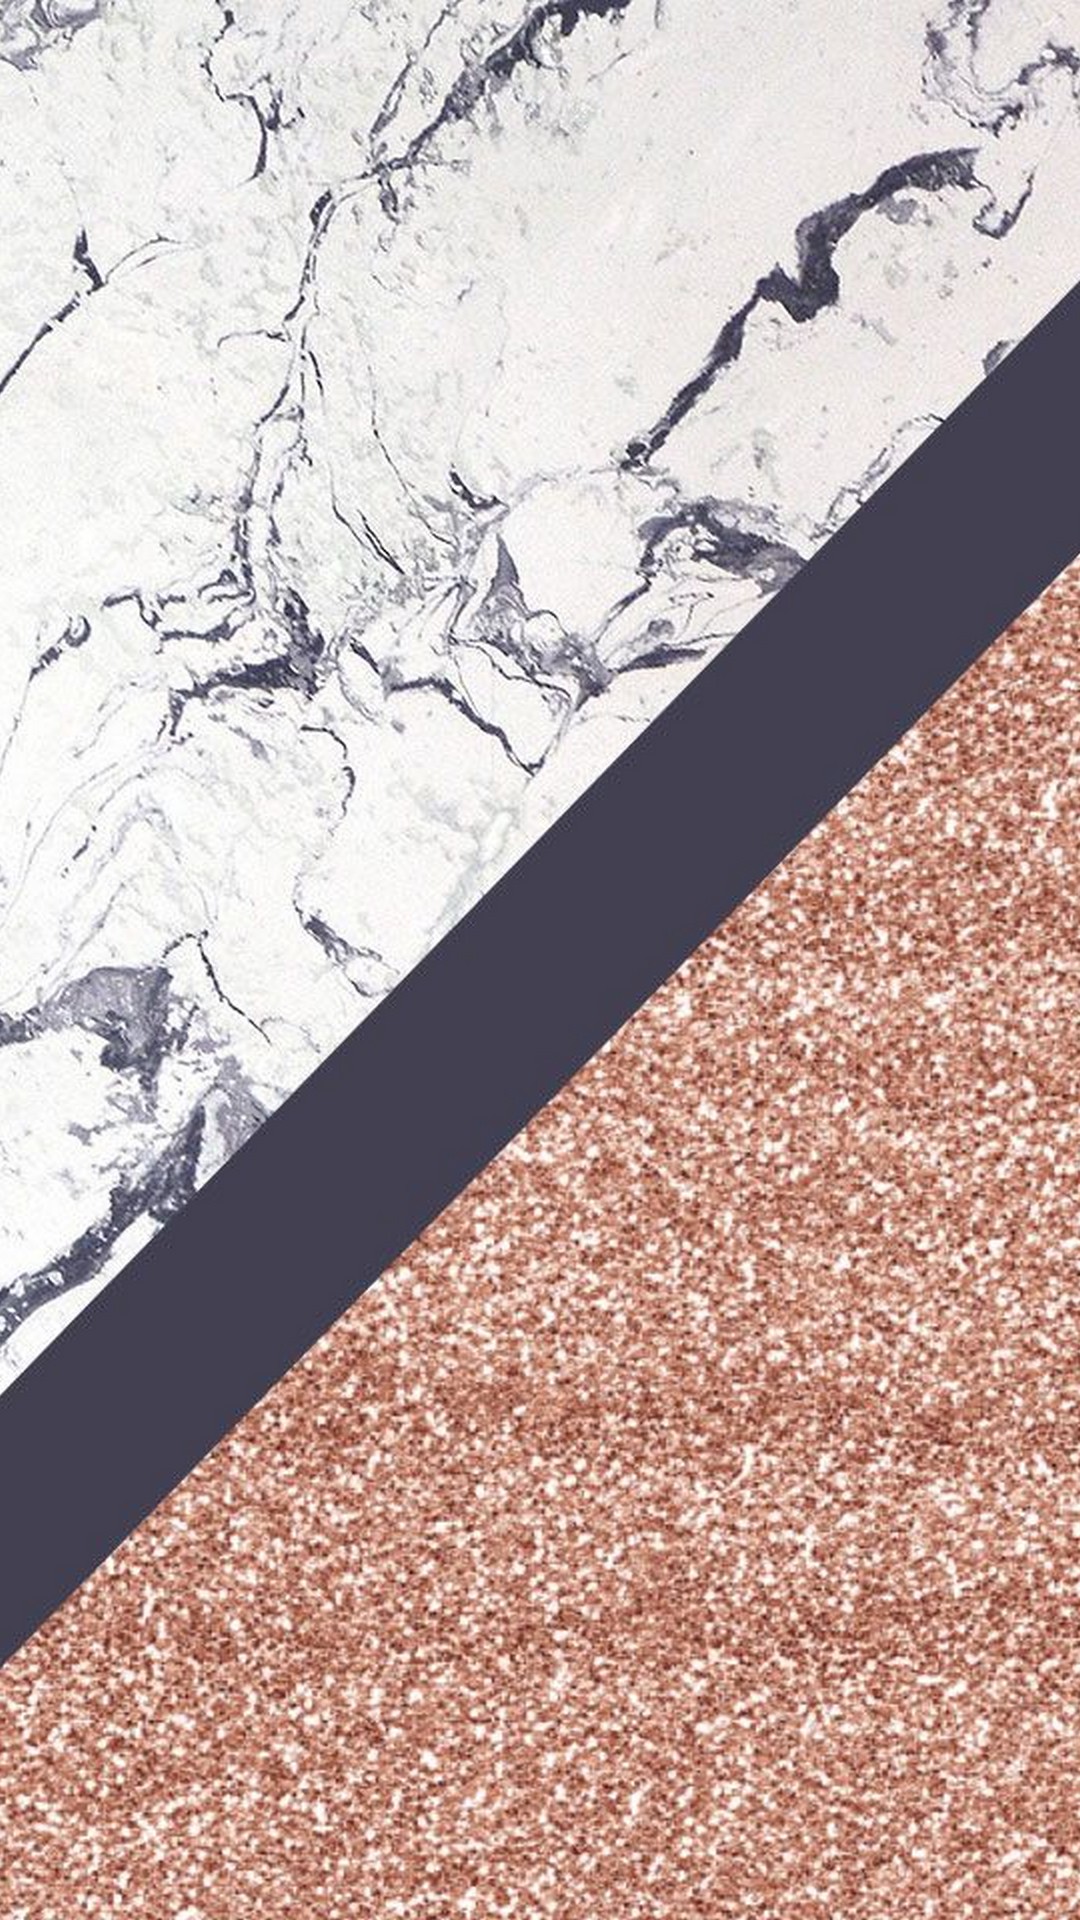 Iphone 7 Wallpaper Rose Gold Marble Resolution - Lock Screen Marble Wallpaper For Iphone - HD Wallpaper 